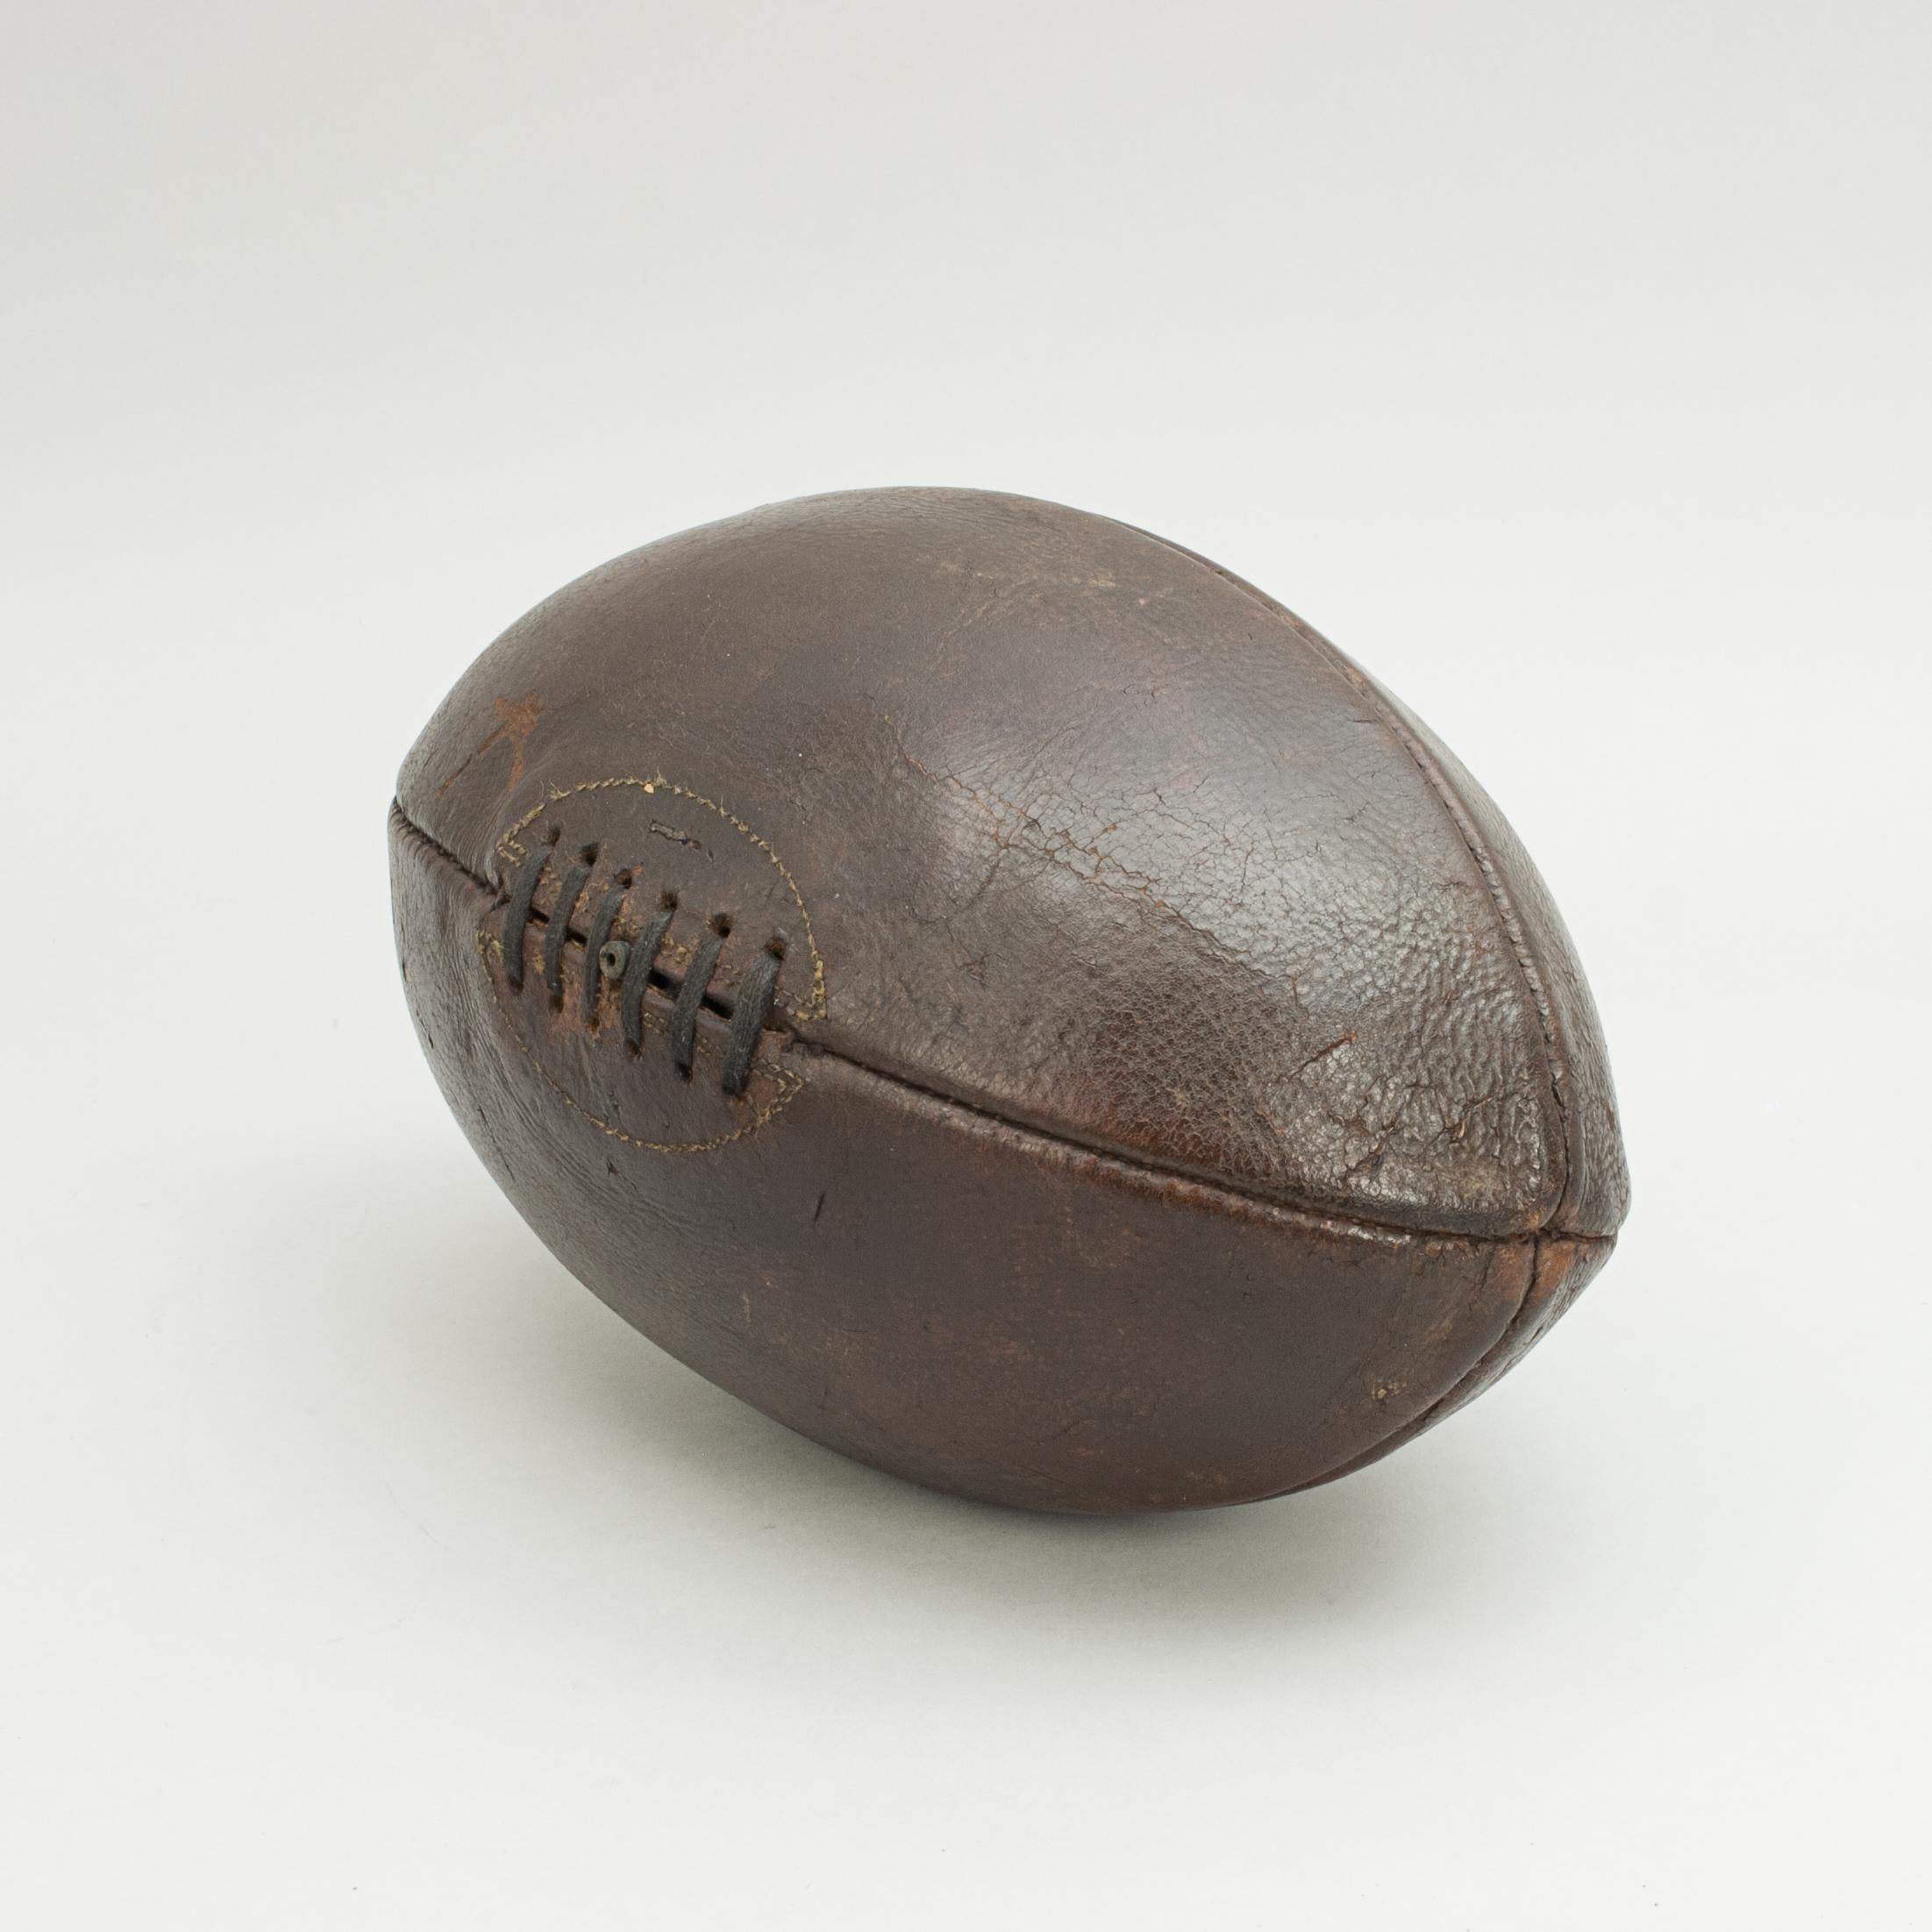 English Antique Leather, Rugby Ball, Football Hand Stiched